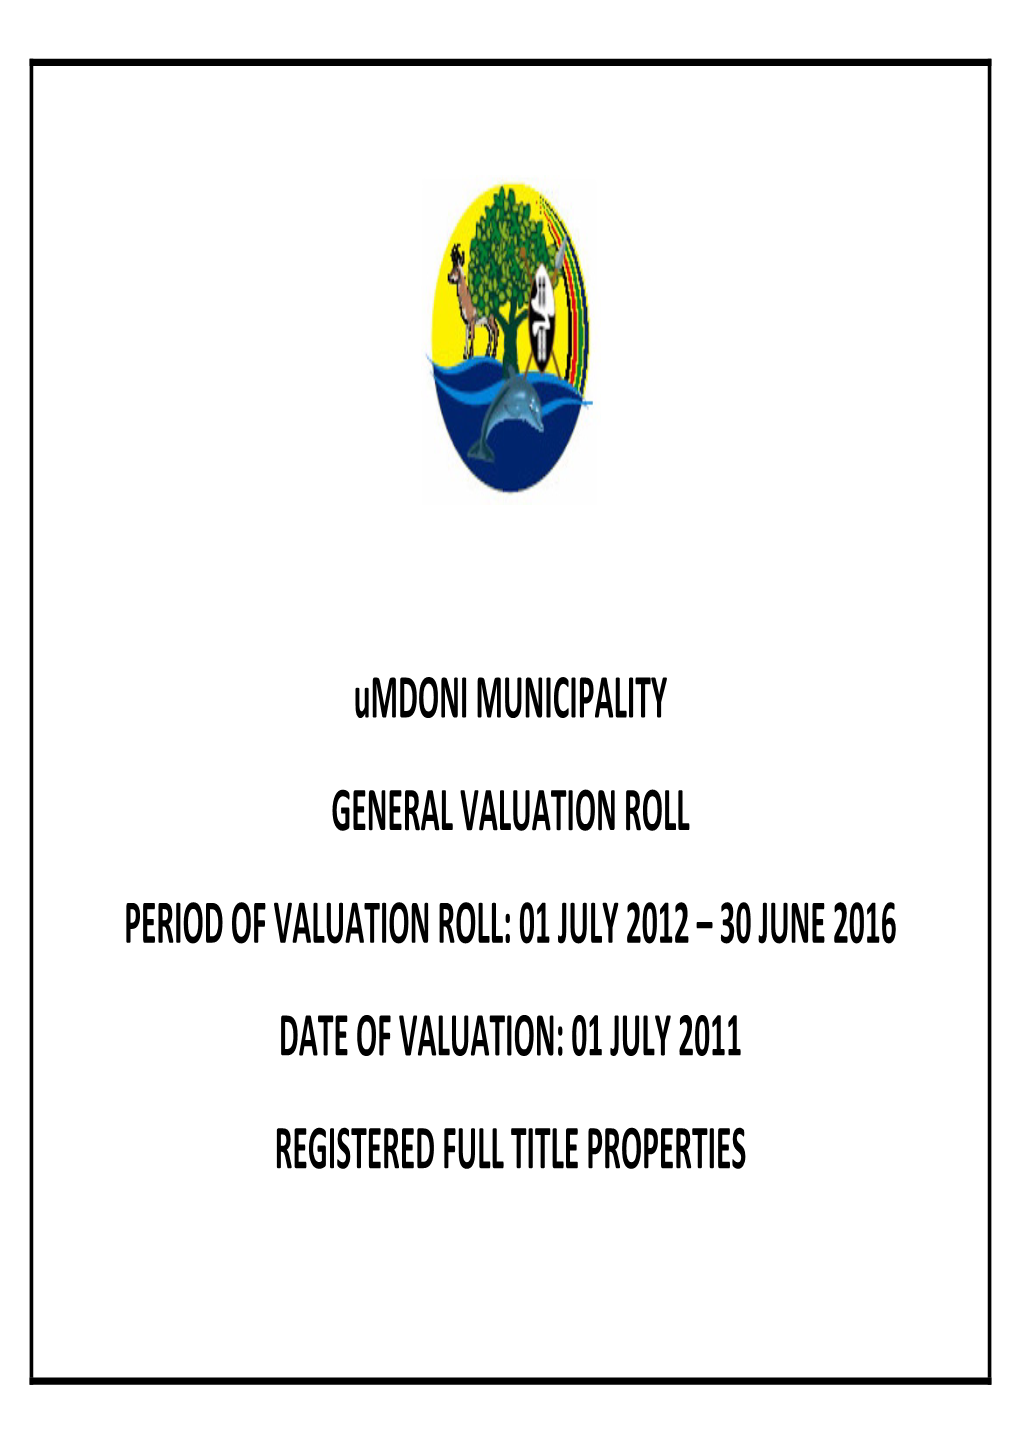 01 July 2012 – 30 June 2016 Date of Valuation: 01 July 2011 Registered Full Title Properties